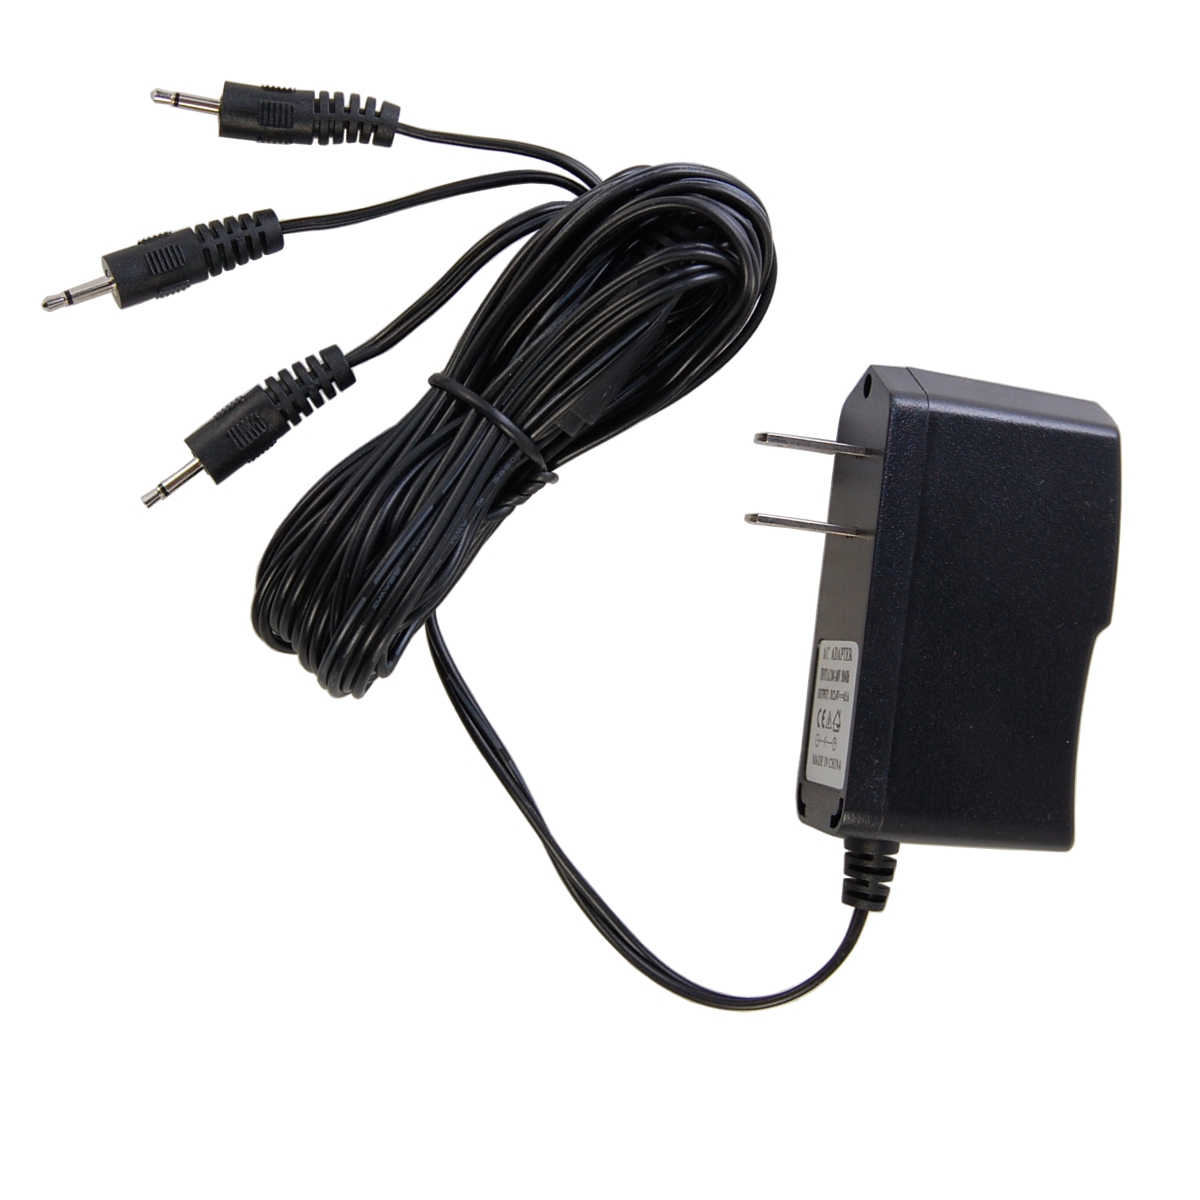 HQRP AC Adapter for Department 56 Baking For Santa 56.69805 Snowbabies Power Supply Cord